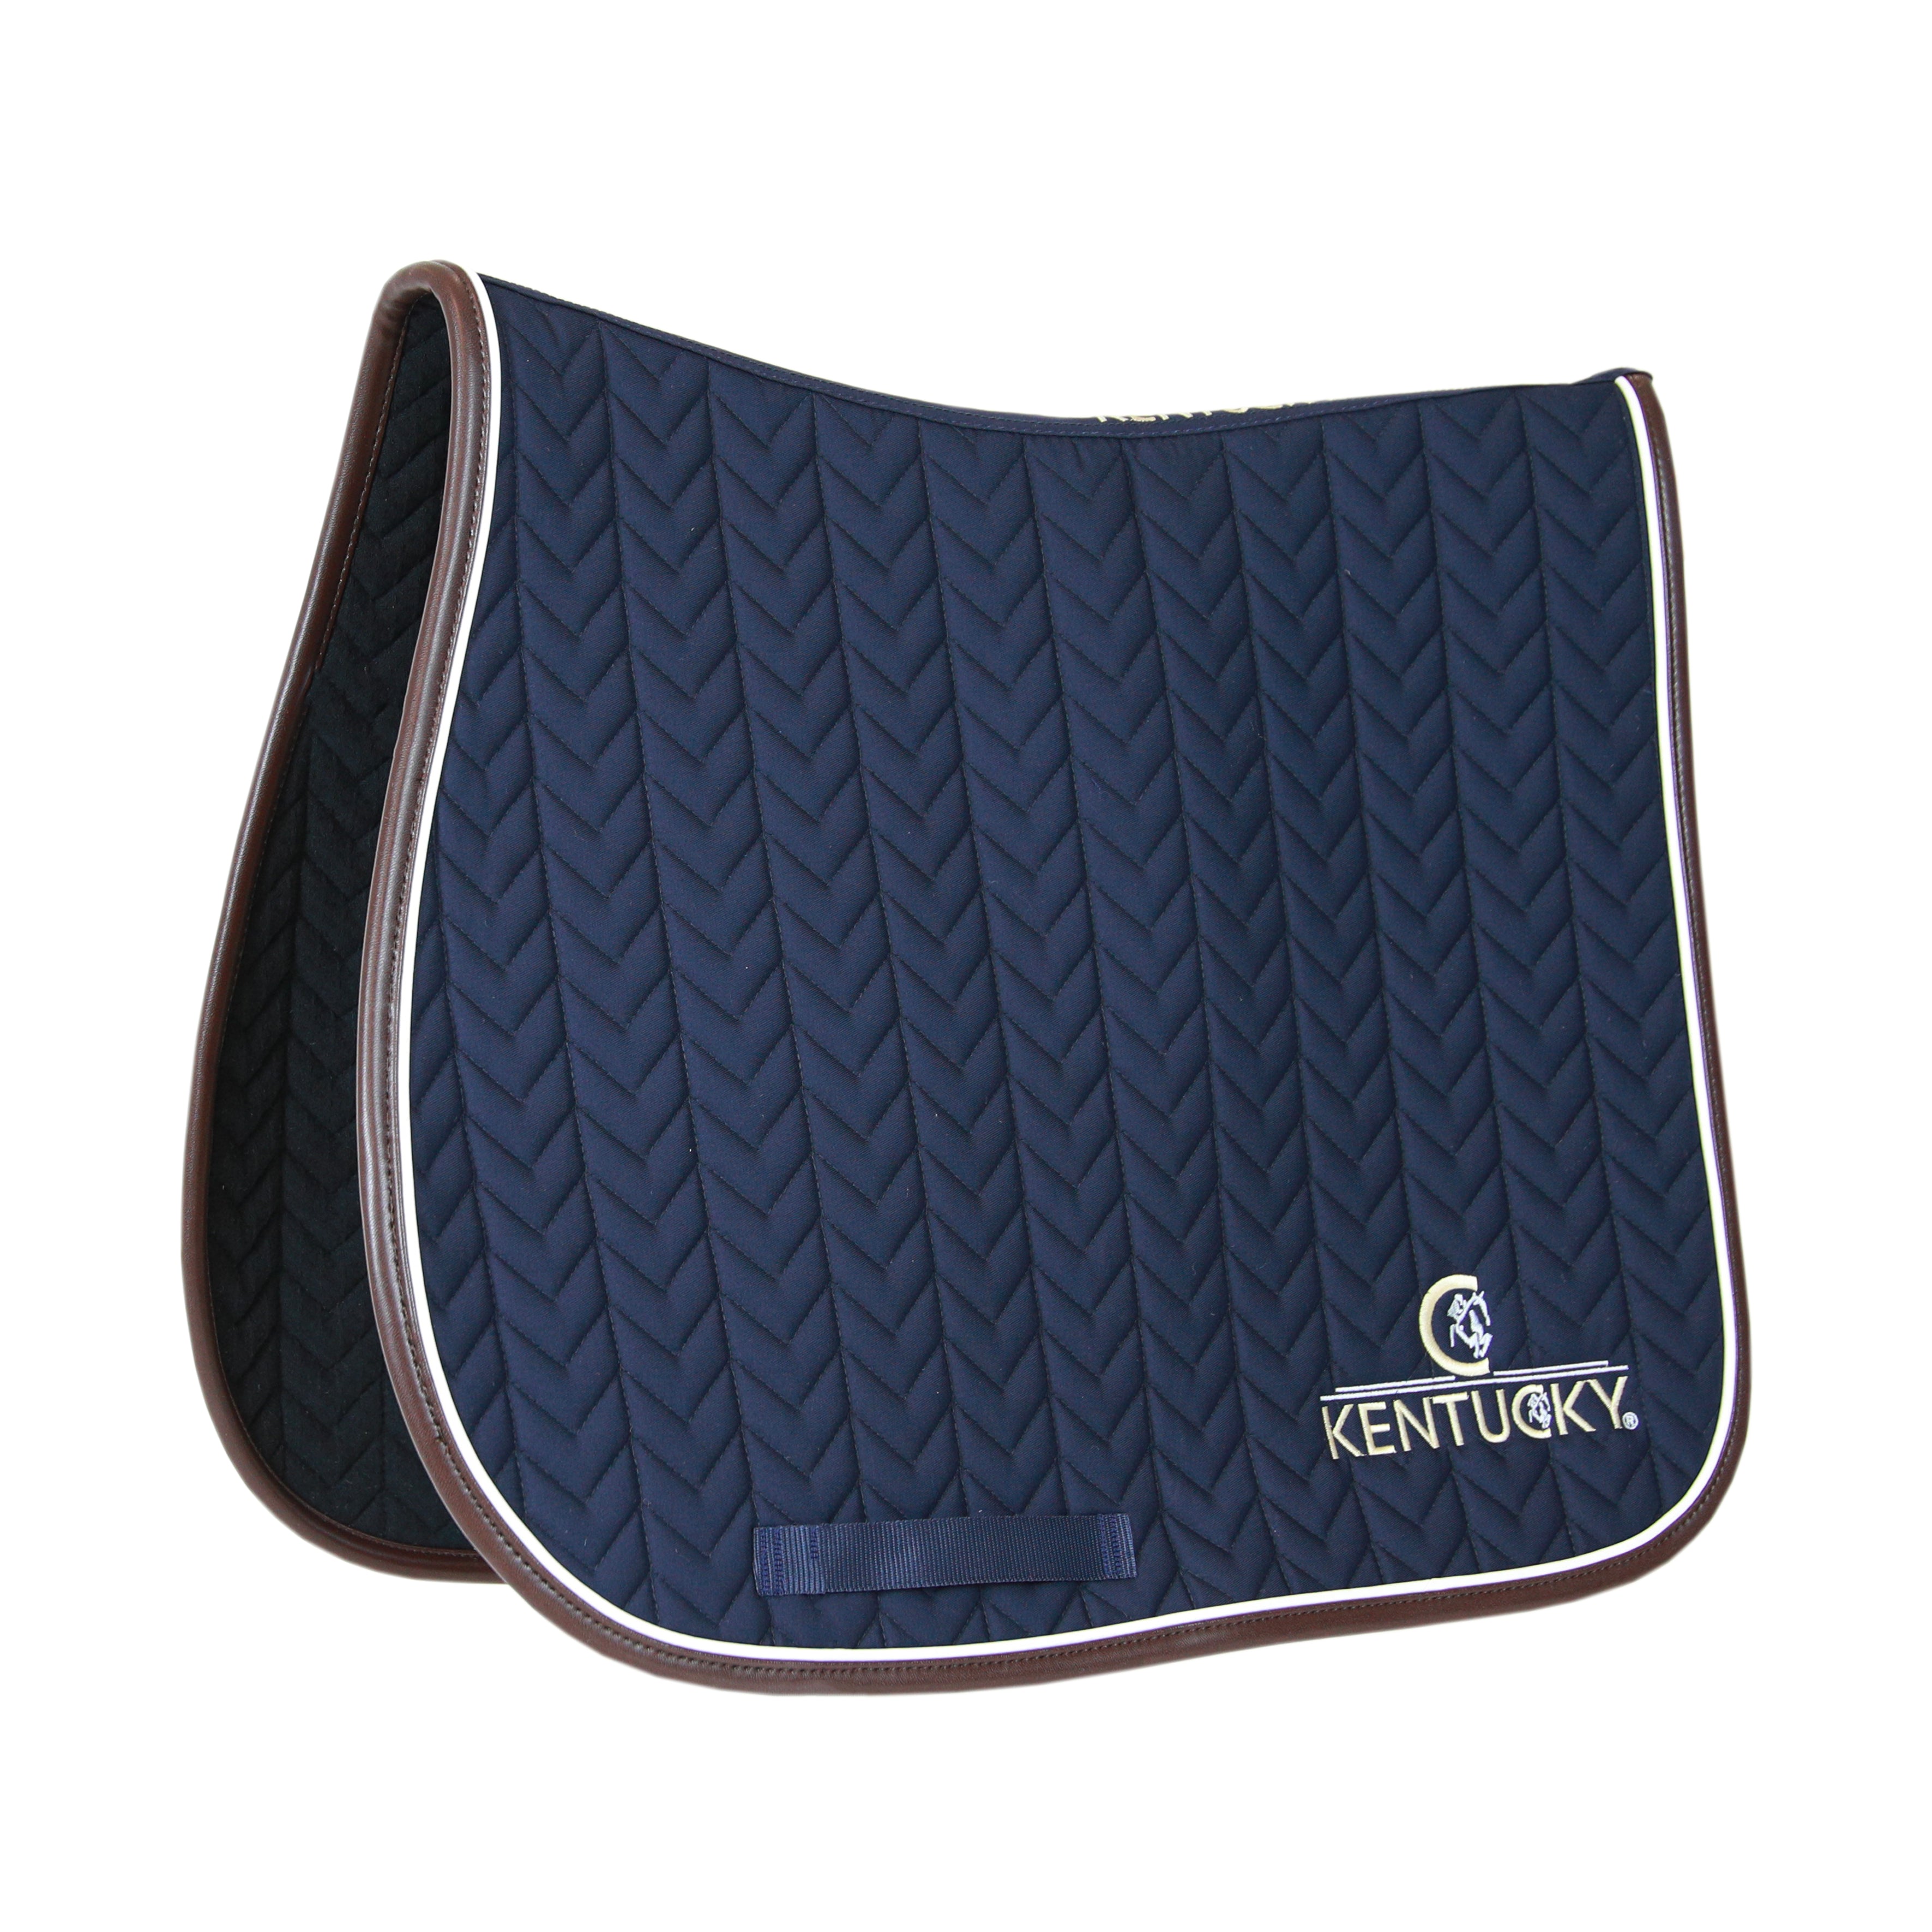 Our Saddle Pad Leather Fishbone is shaped for jumping and provides excellent cushioning between the horse’s back and the saddle while protecting against friction. This saddle pad has a unique fishbone quilting. It has no annoying straps to attach to the saddle, only a nylon strap for the girth. The Saddle Pad Leather Fishbone features a very classy leather binding and the stylish Kentucky logo